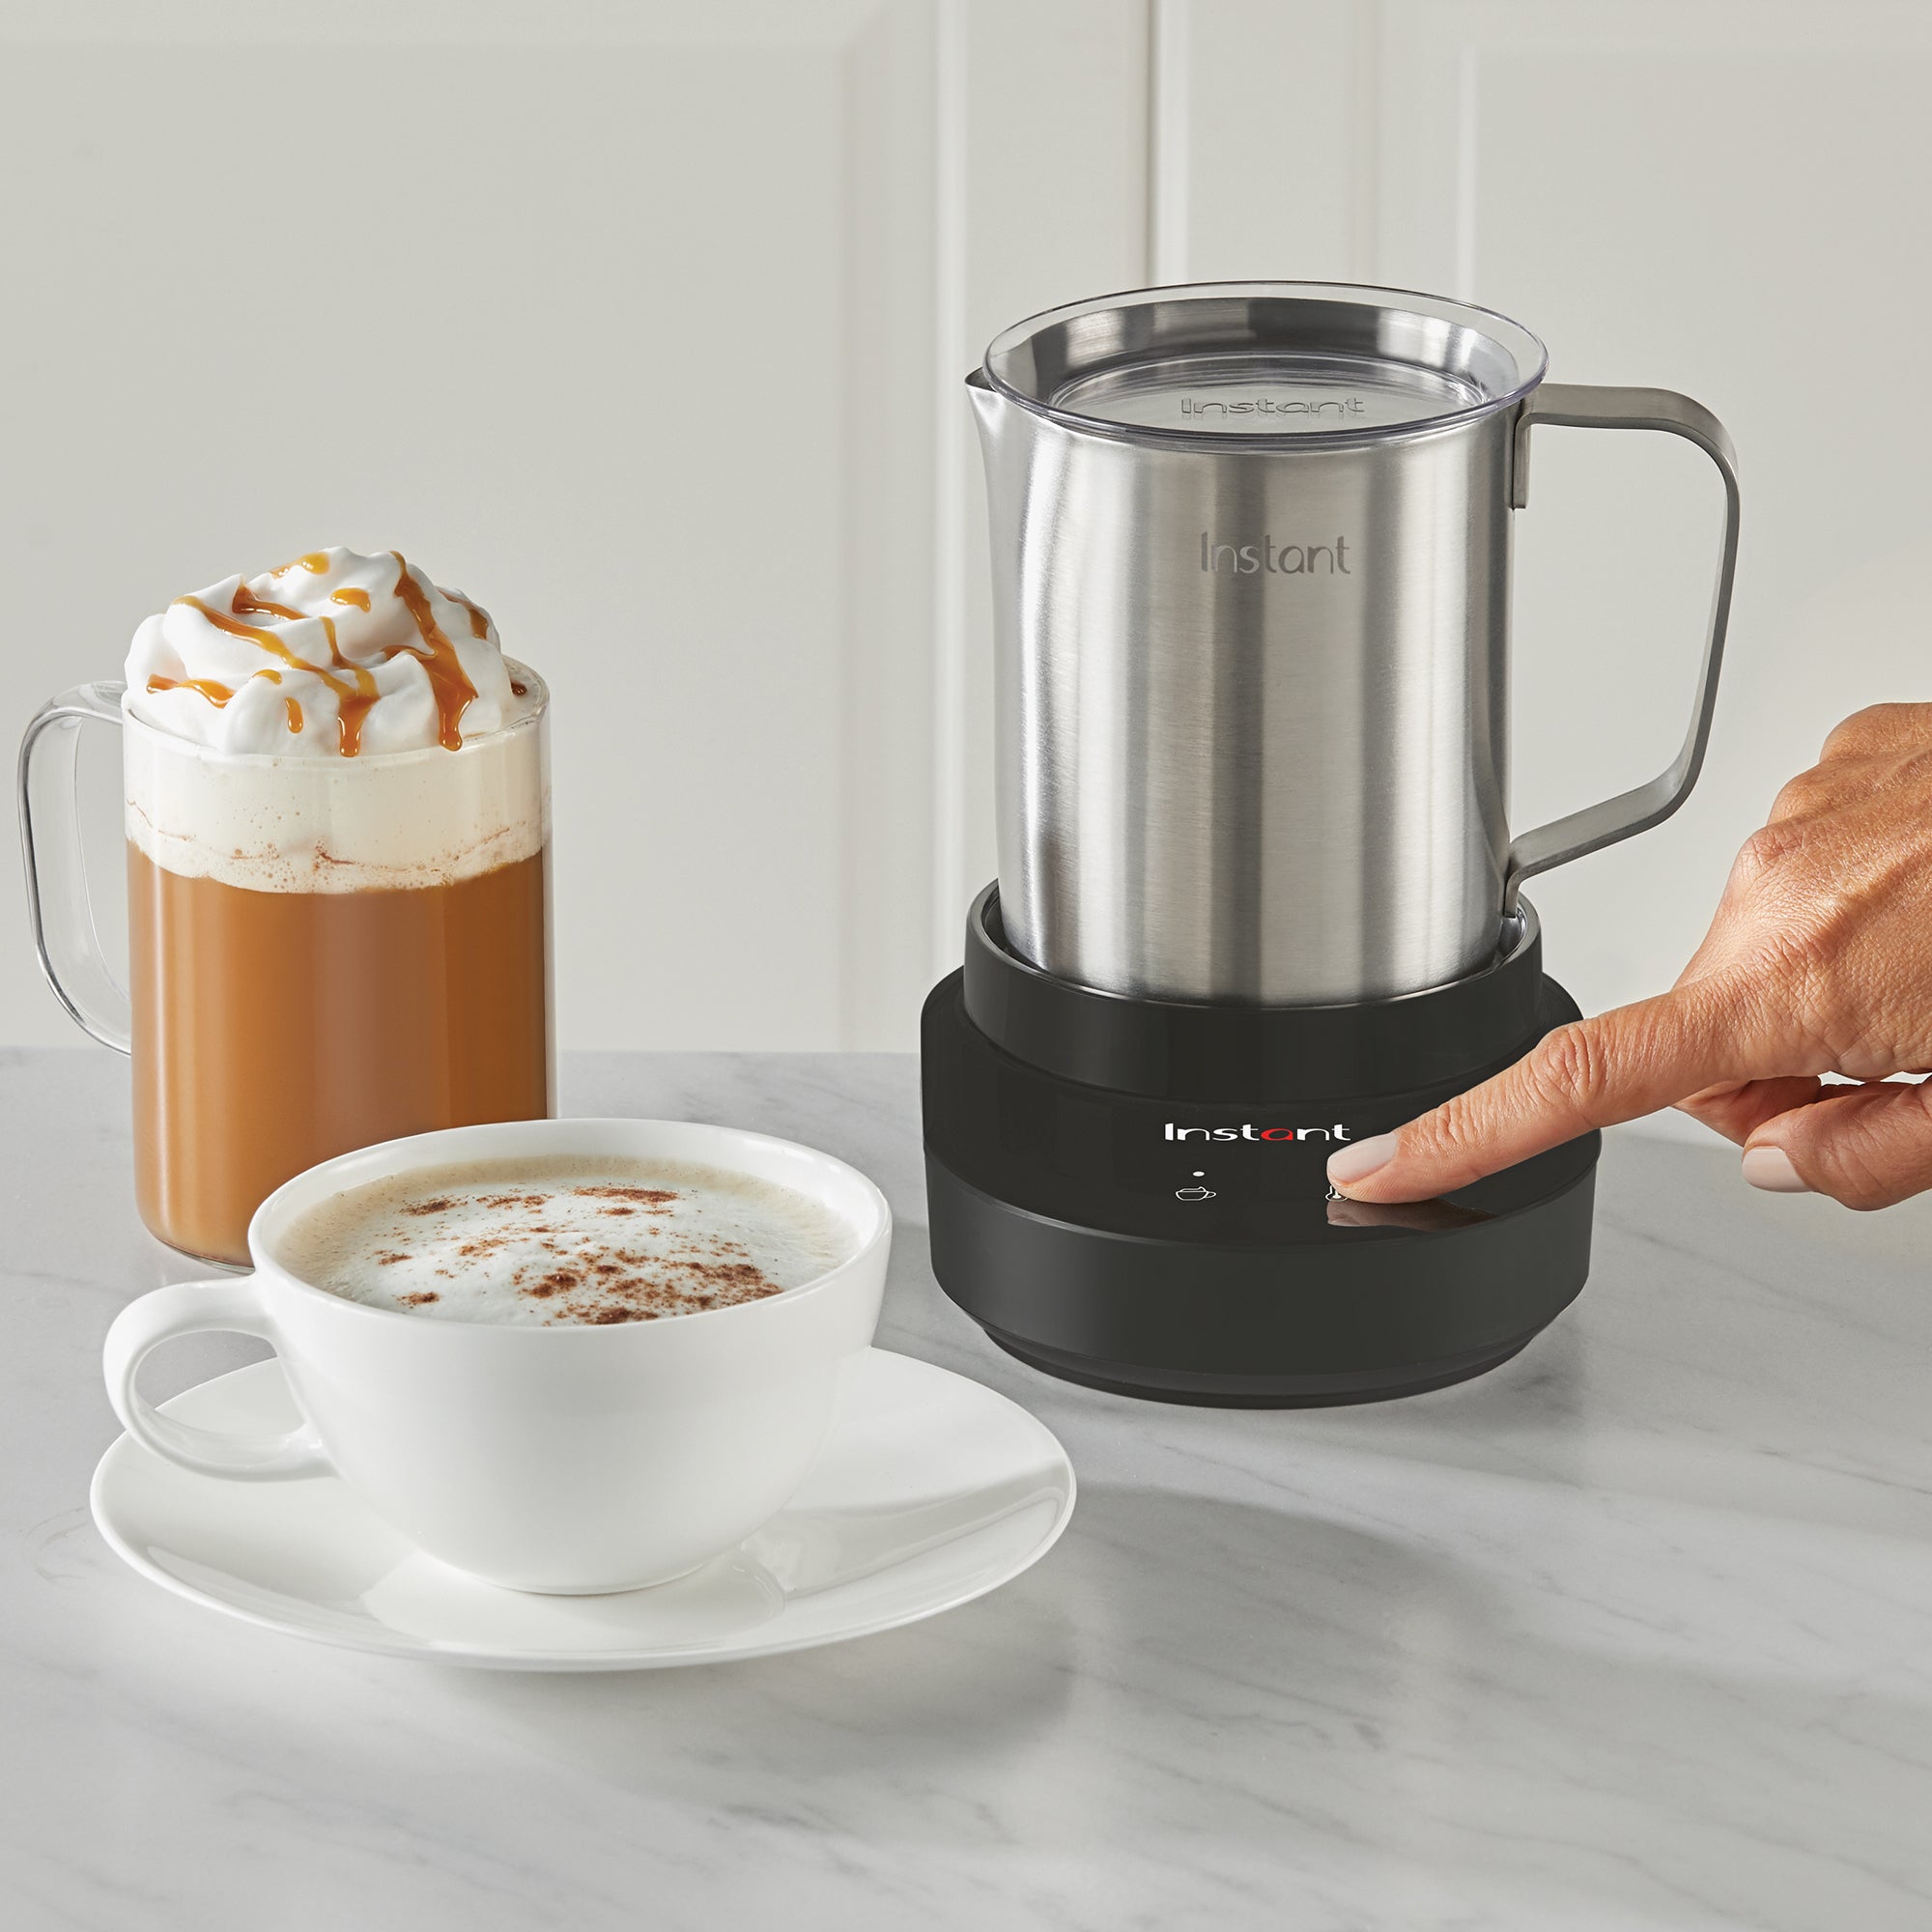 Instant™  Frother Station